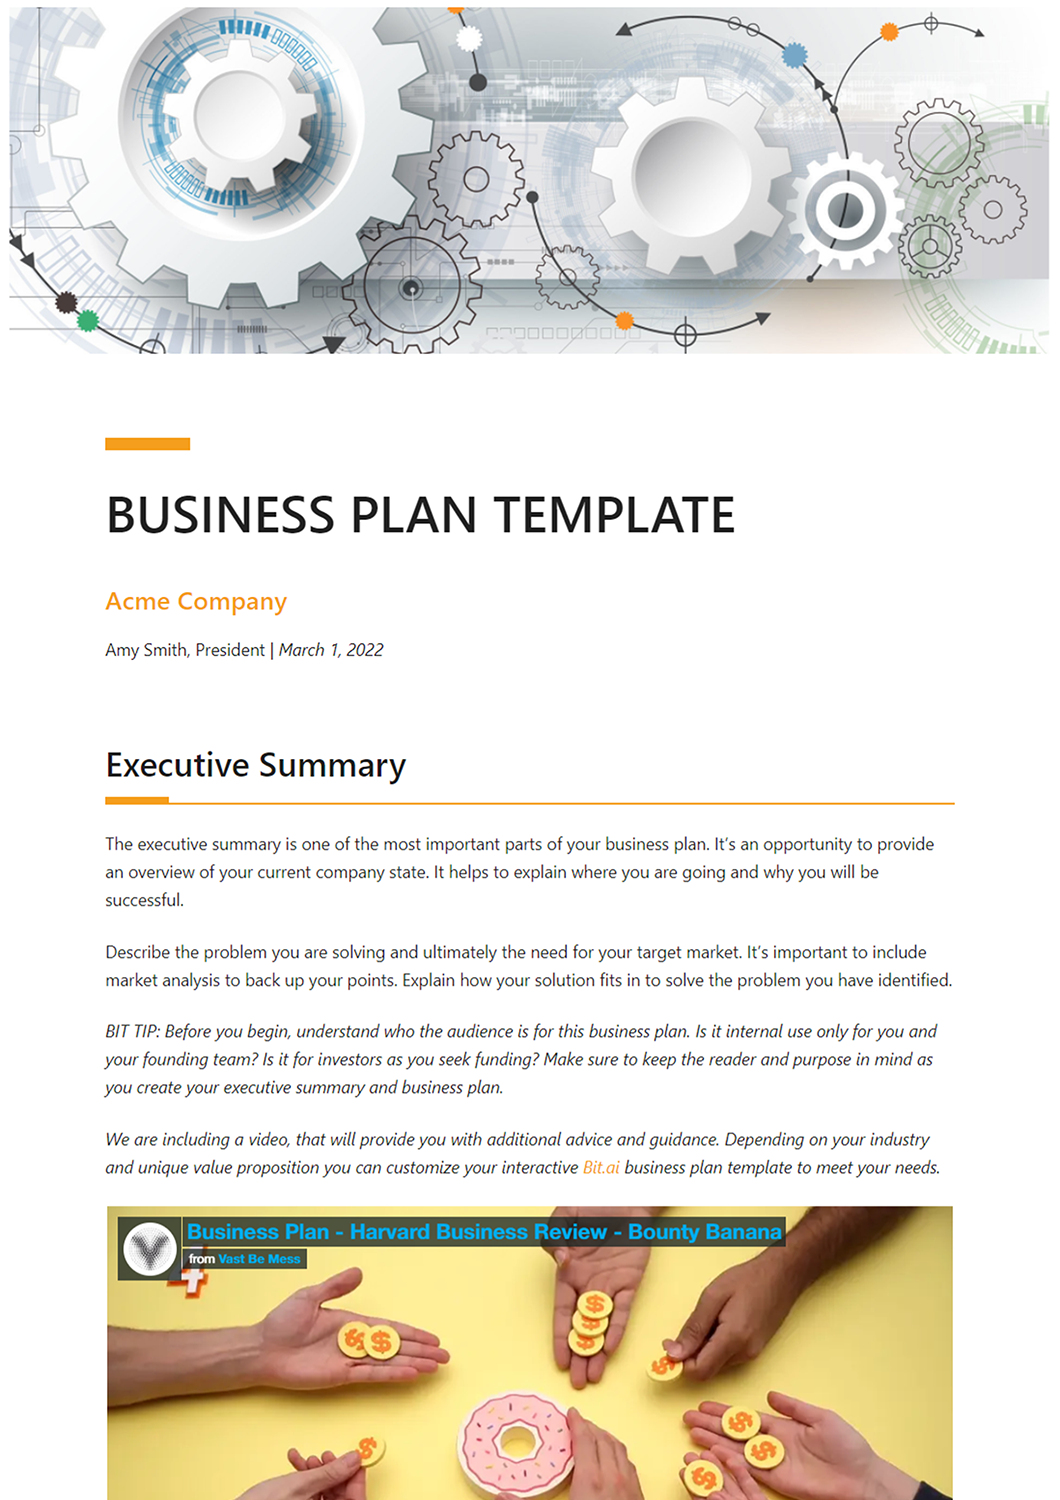 use business plan